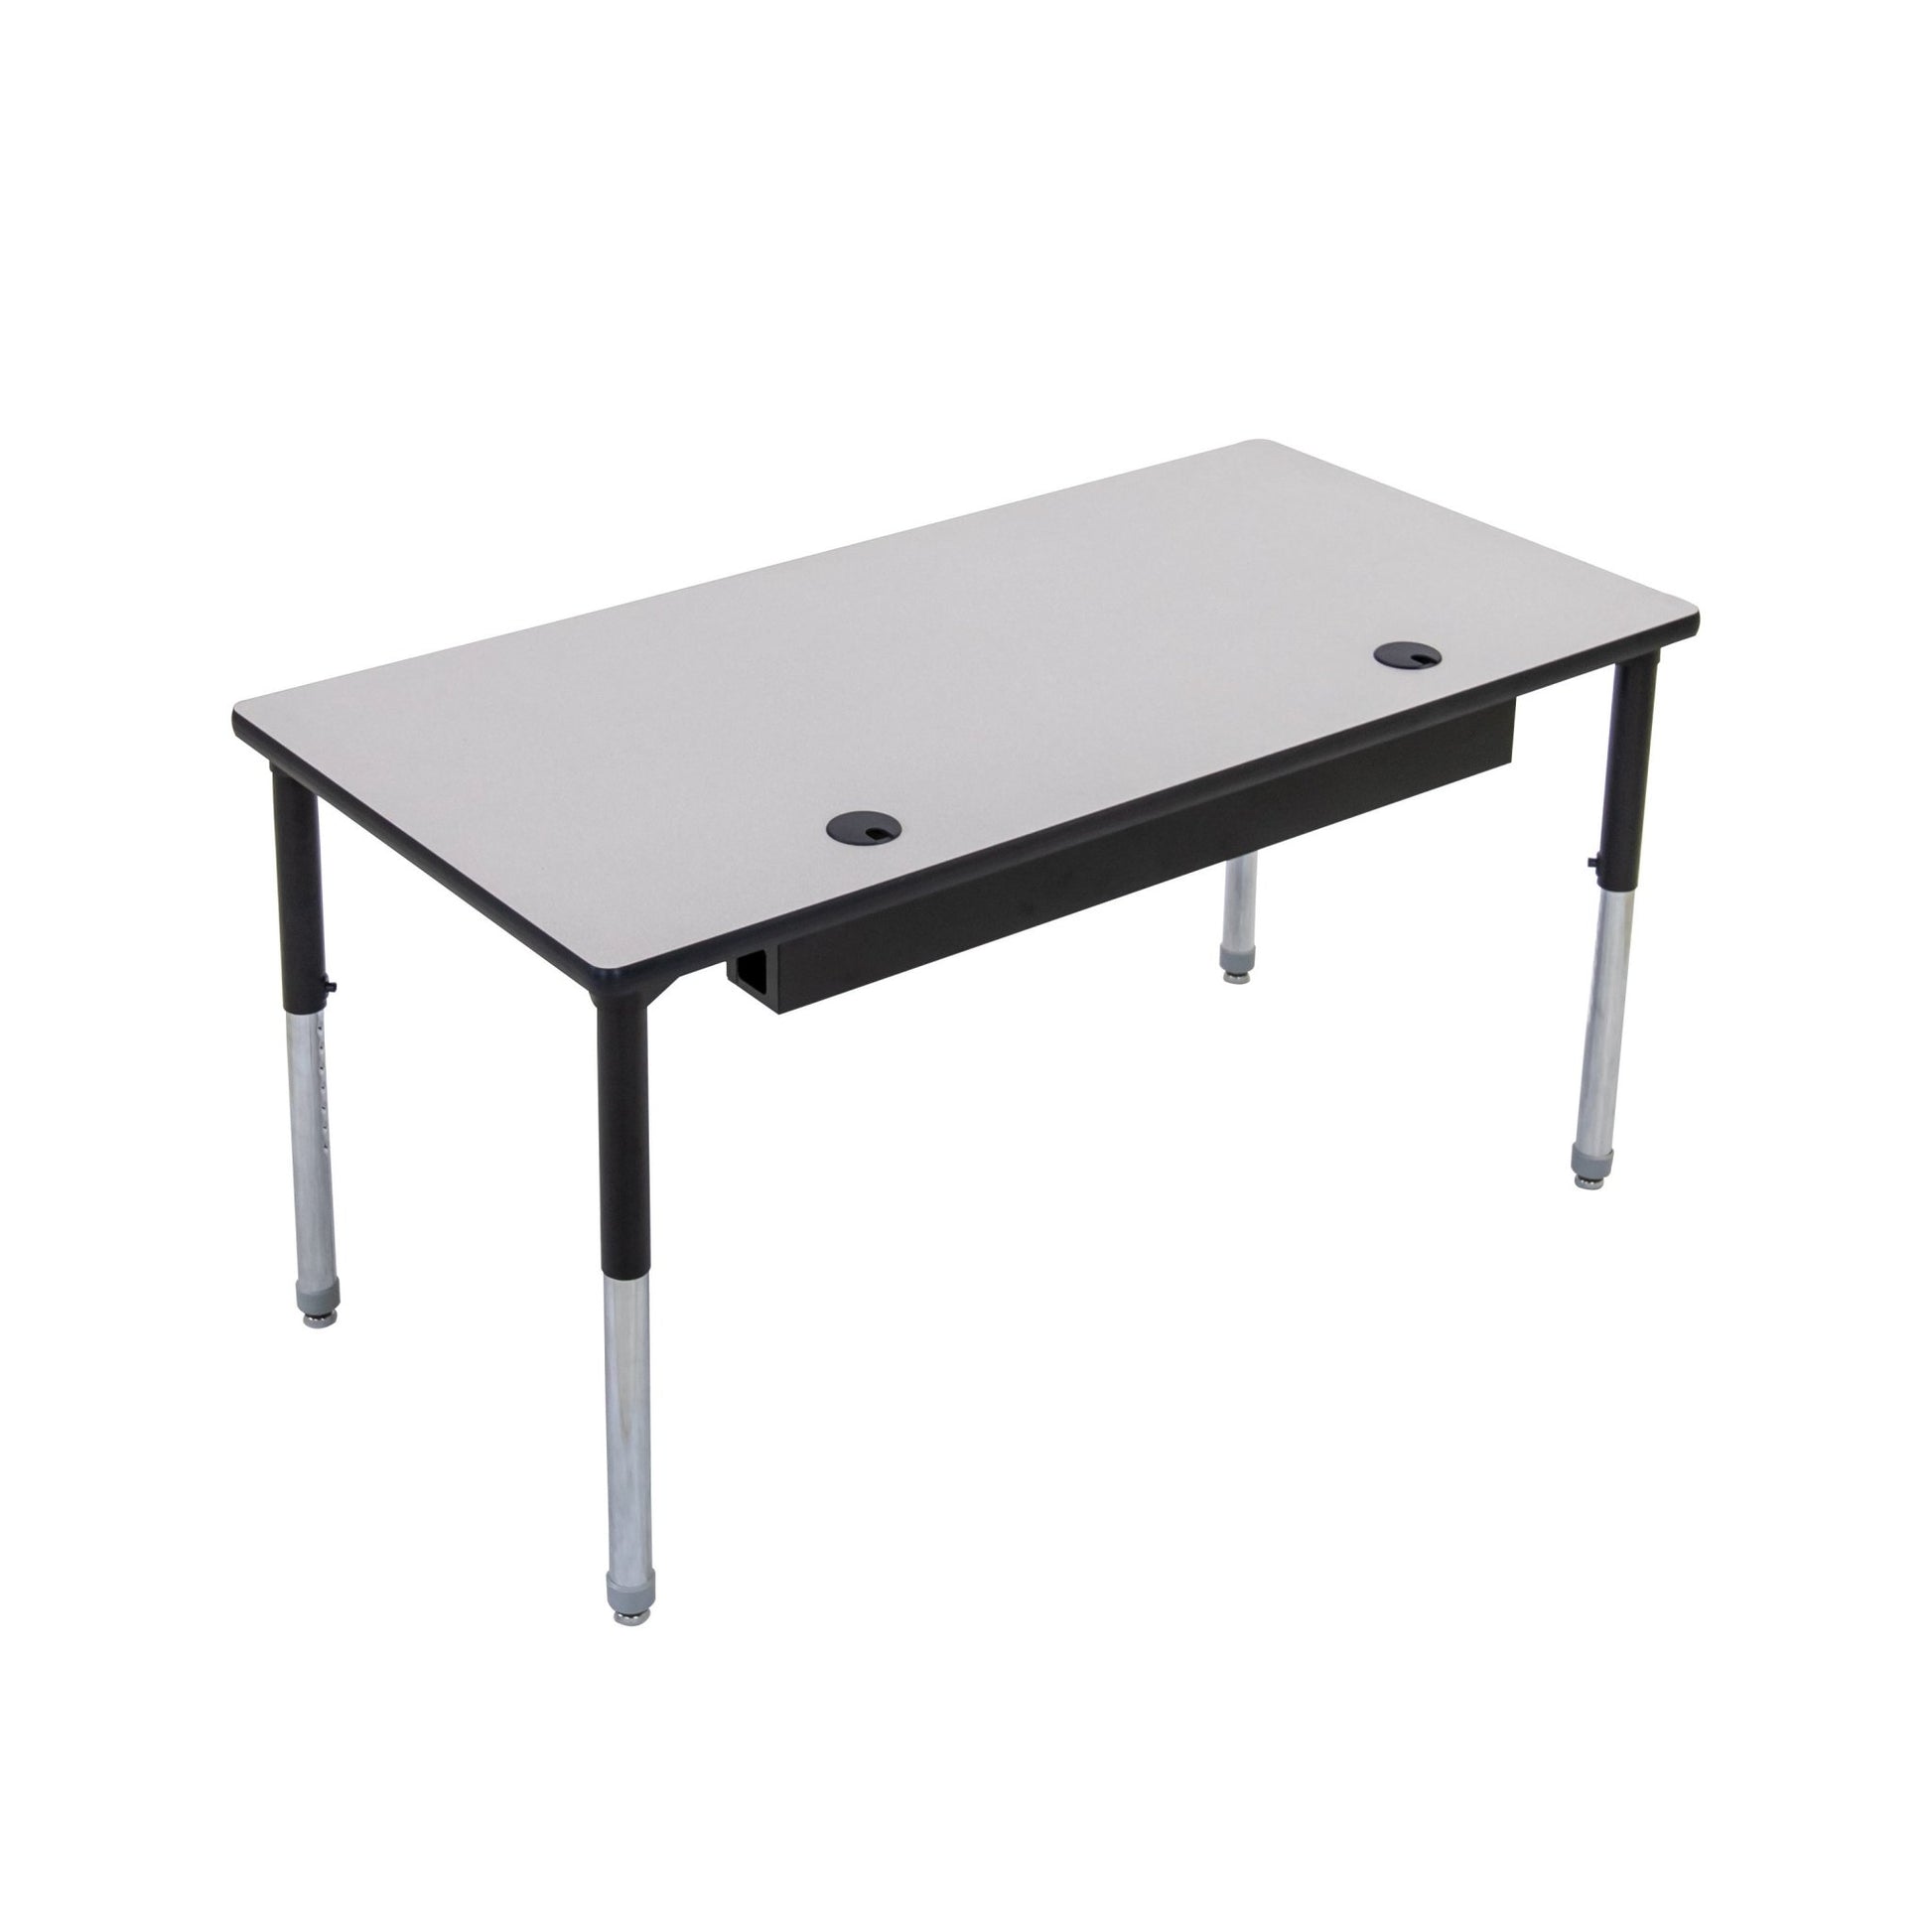 AmTab Computer and Technology Table - Activity Legs - Grommet Hole - Wire Management - 36"W x 60"L (AmTab AMT-A365DW) - SchoolOutlet